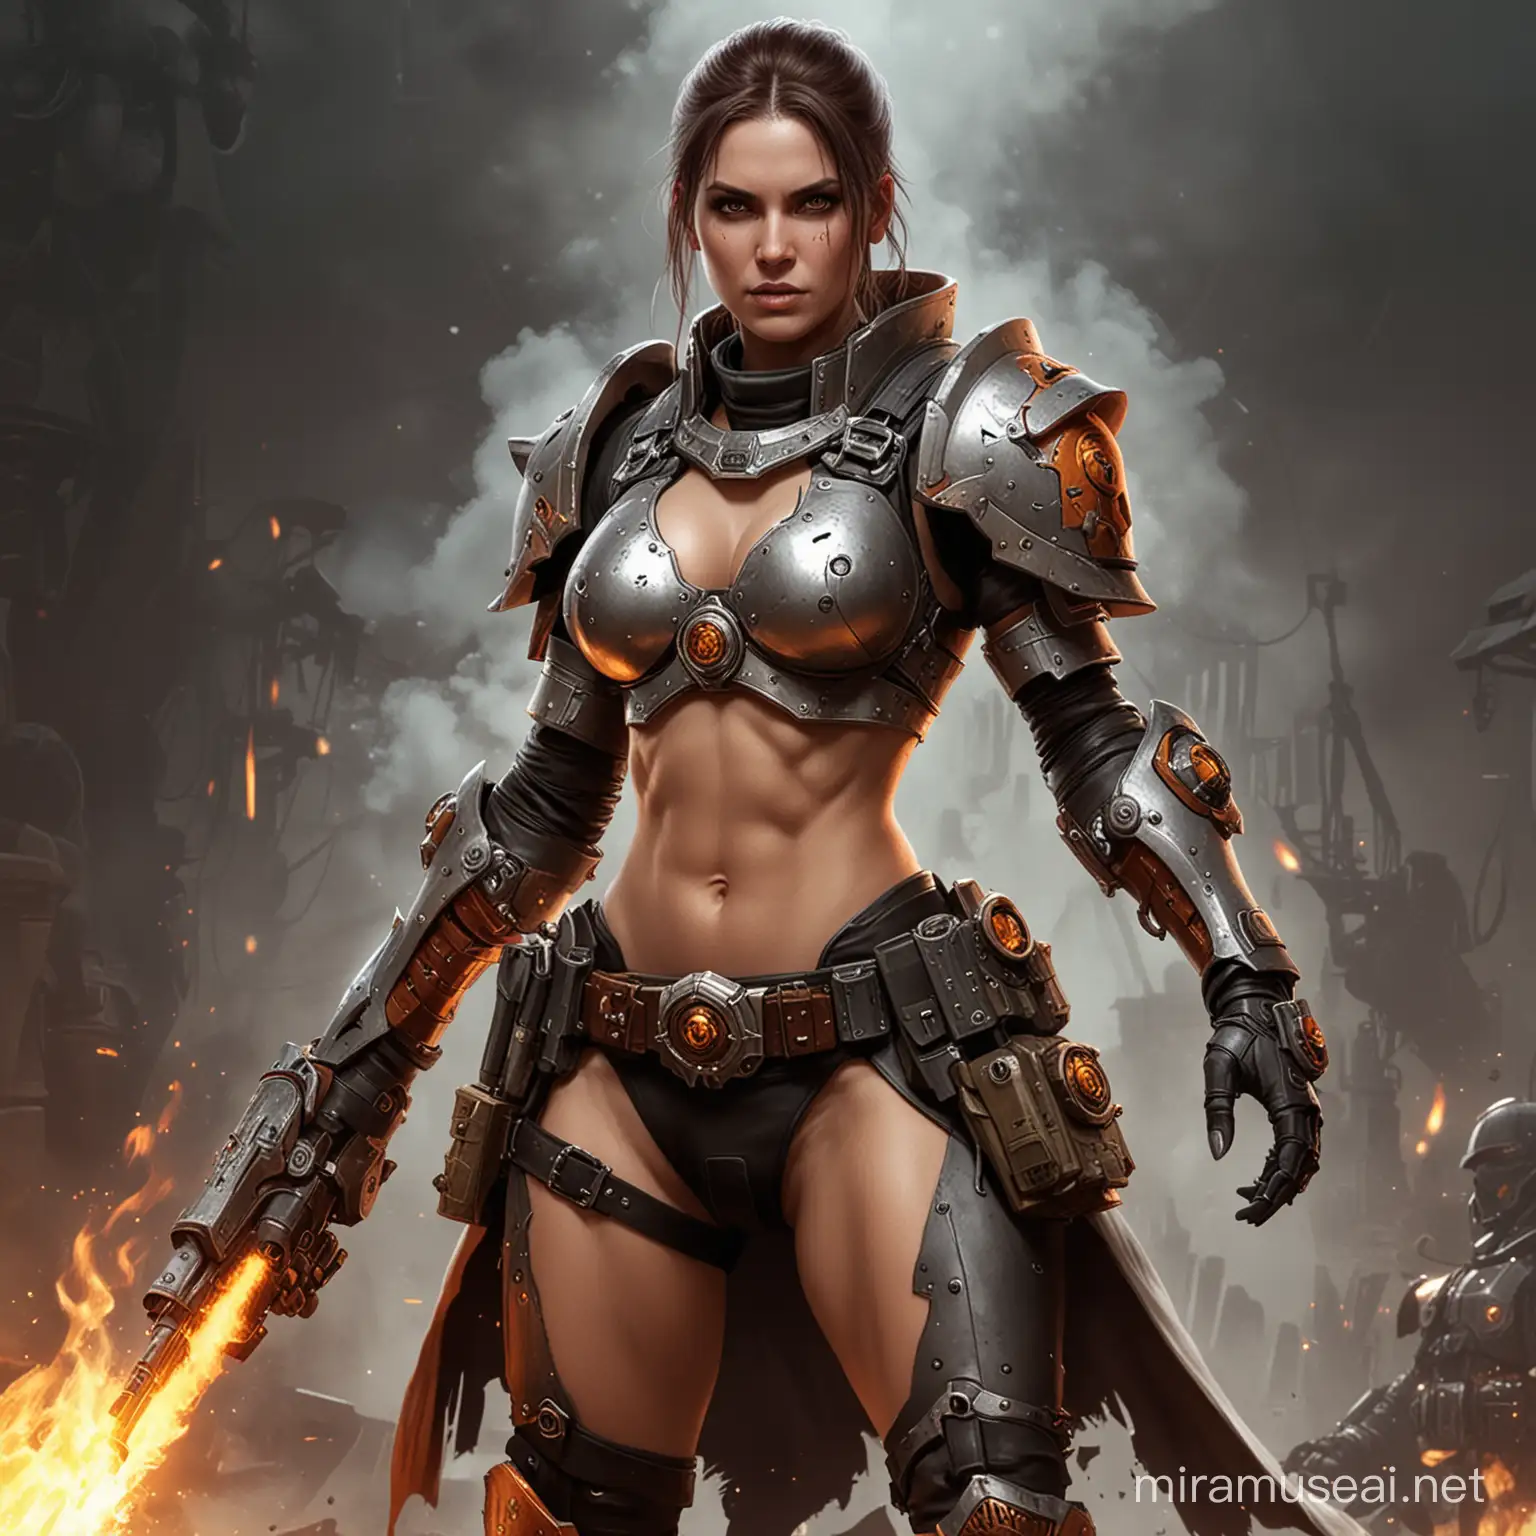 A Female Pyromancer Psyker in the Warhammer 40k Universe. She is a Melee Fighter. She is wearing a futuristic Armor and is half naked